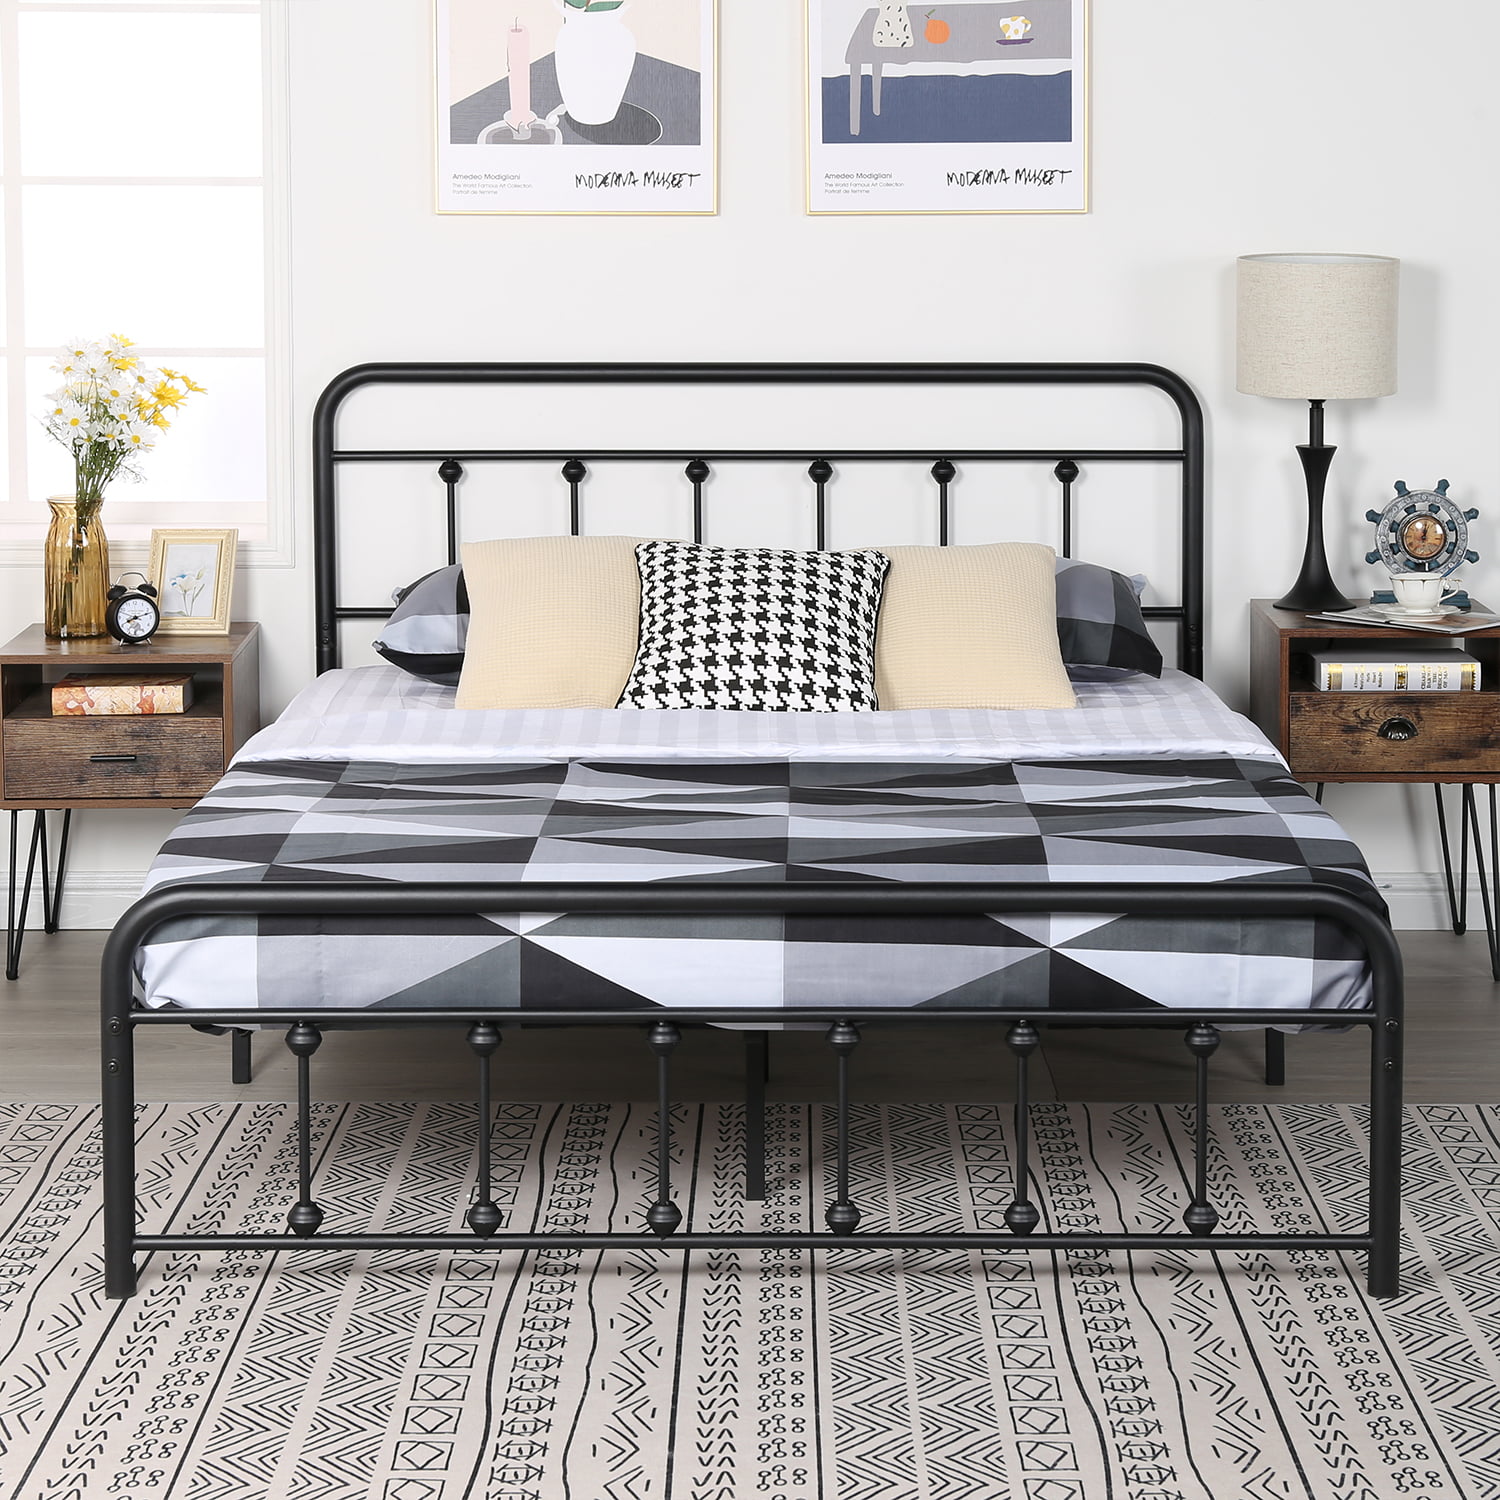 VECELO Metal Queen Platform Bed Frame with Headboard and Footboard, No